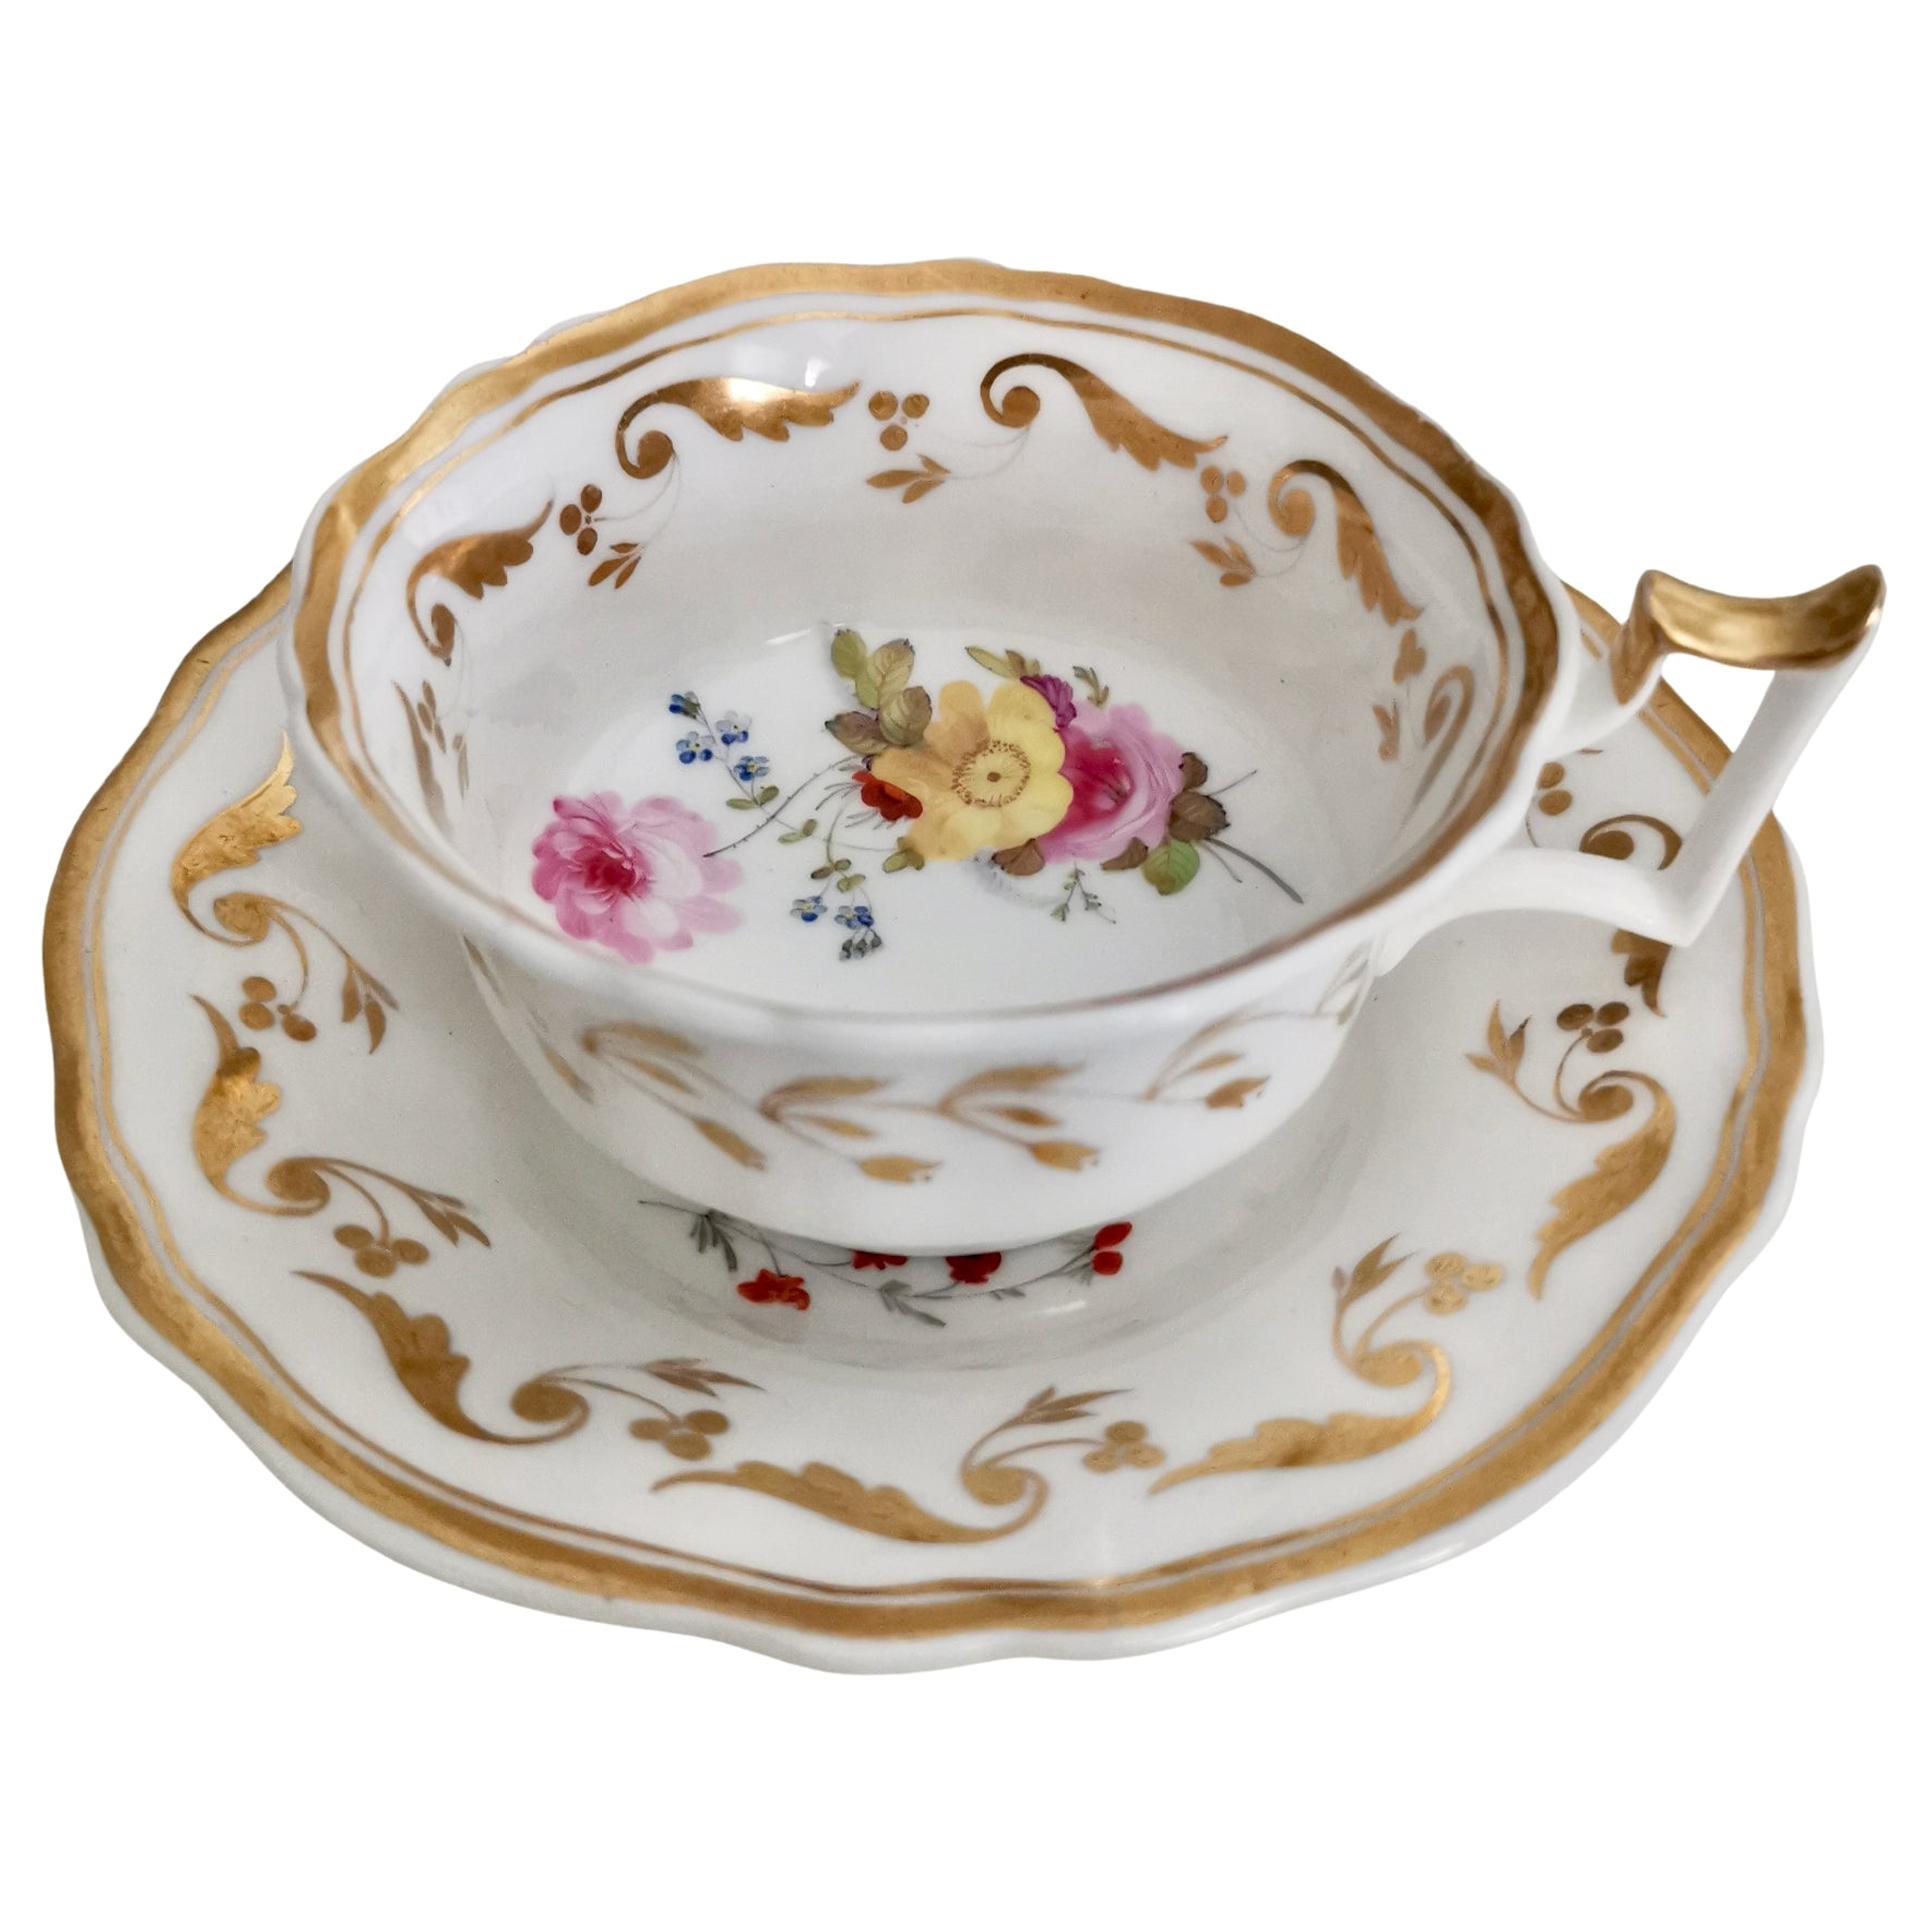 Yates Porcelain Teacup, White with Gilt and Flowers, Regency, circa 1825